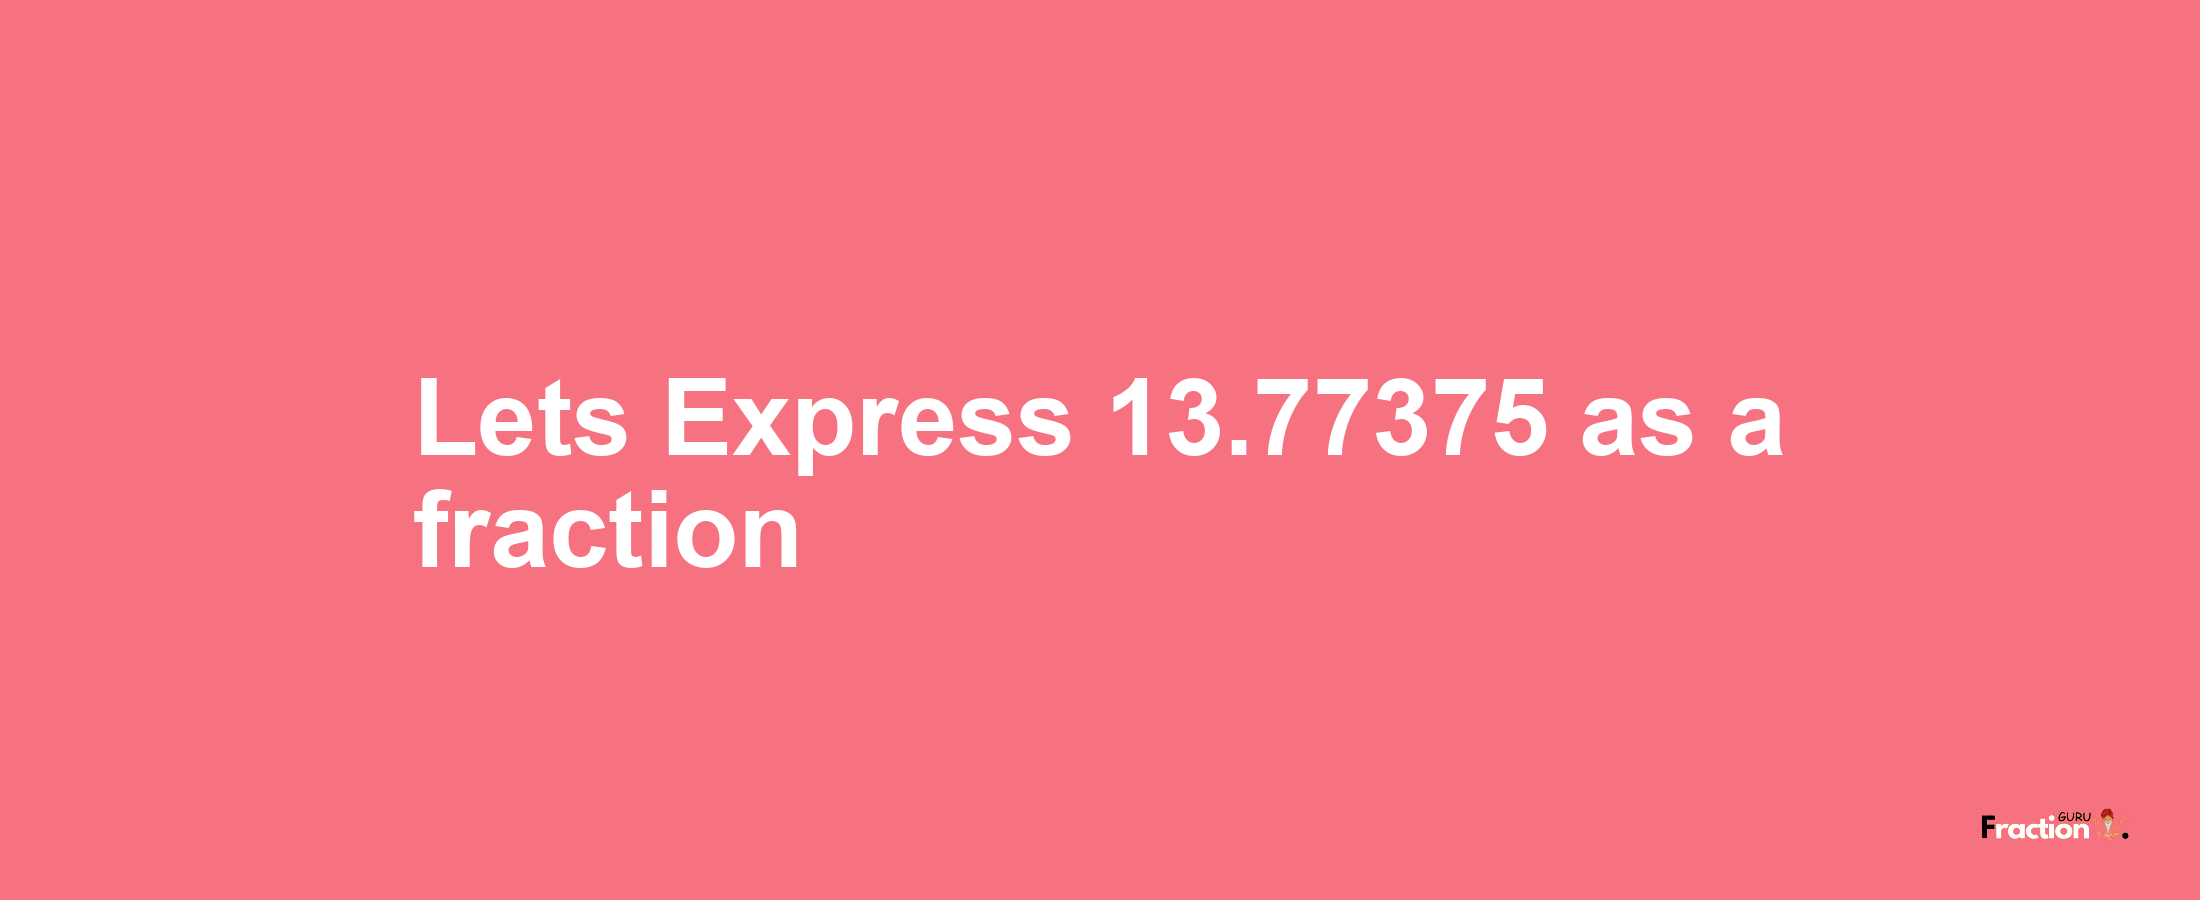 Lets Express 13.77375 as afraction